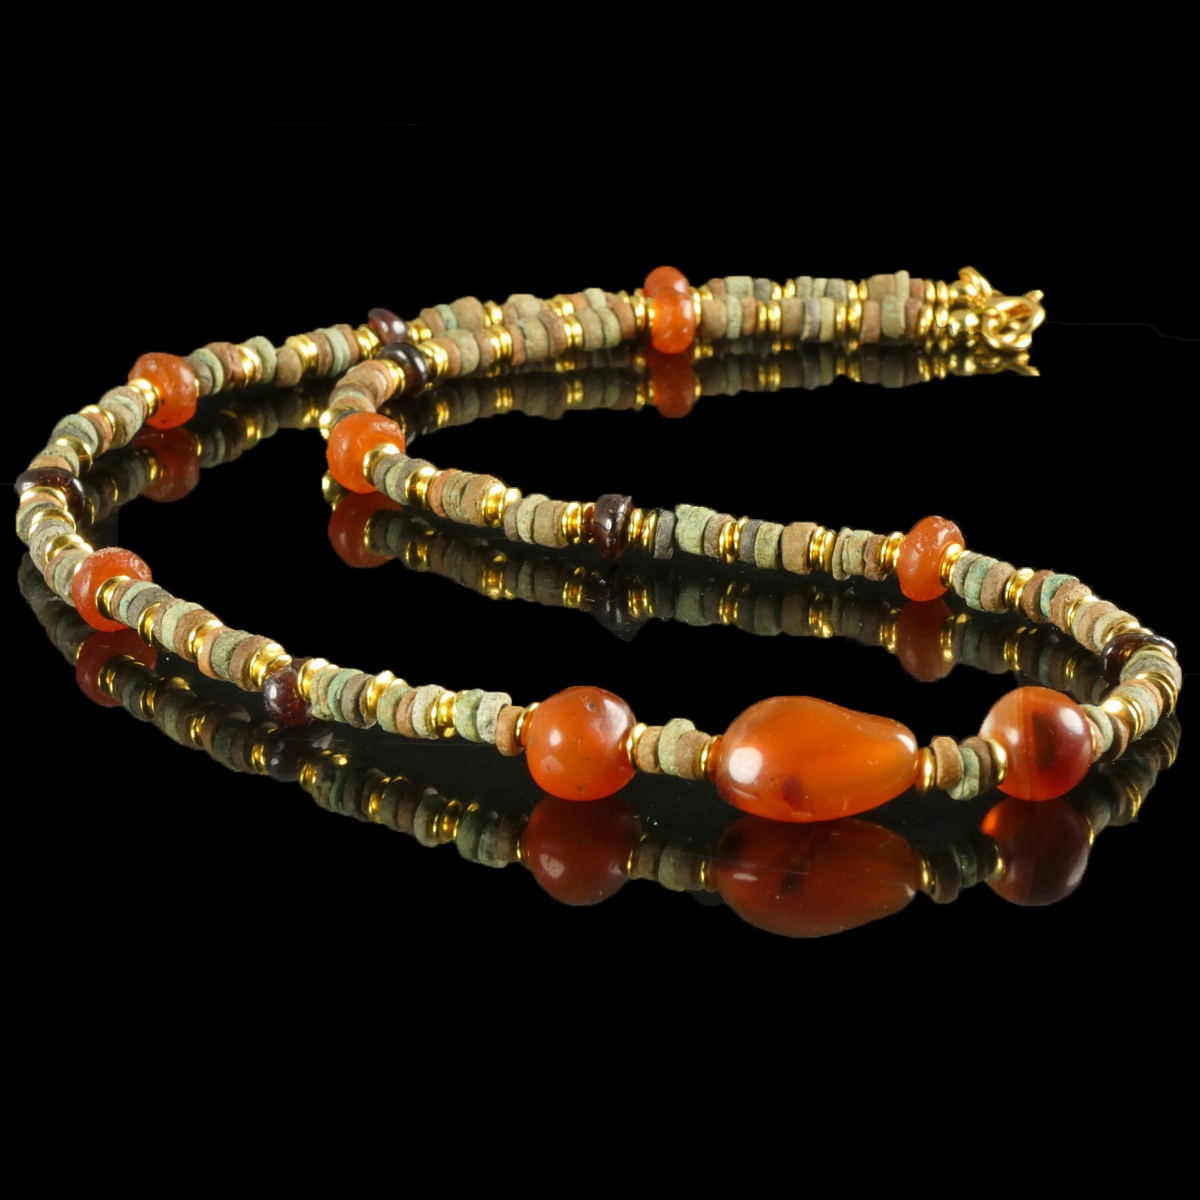 Necklace with Egyptian faience, carnelian and garnet beads